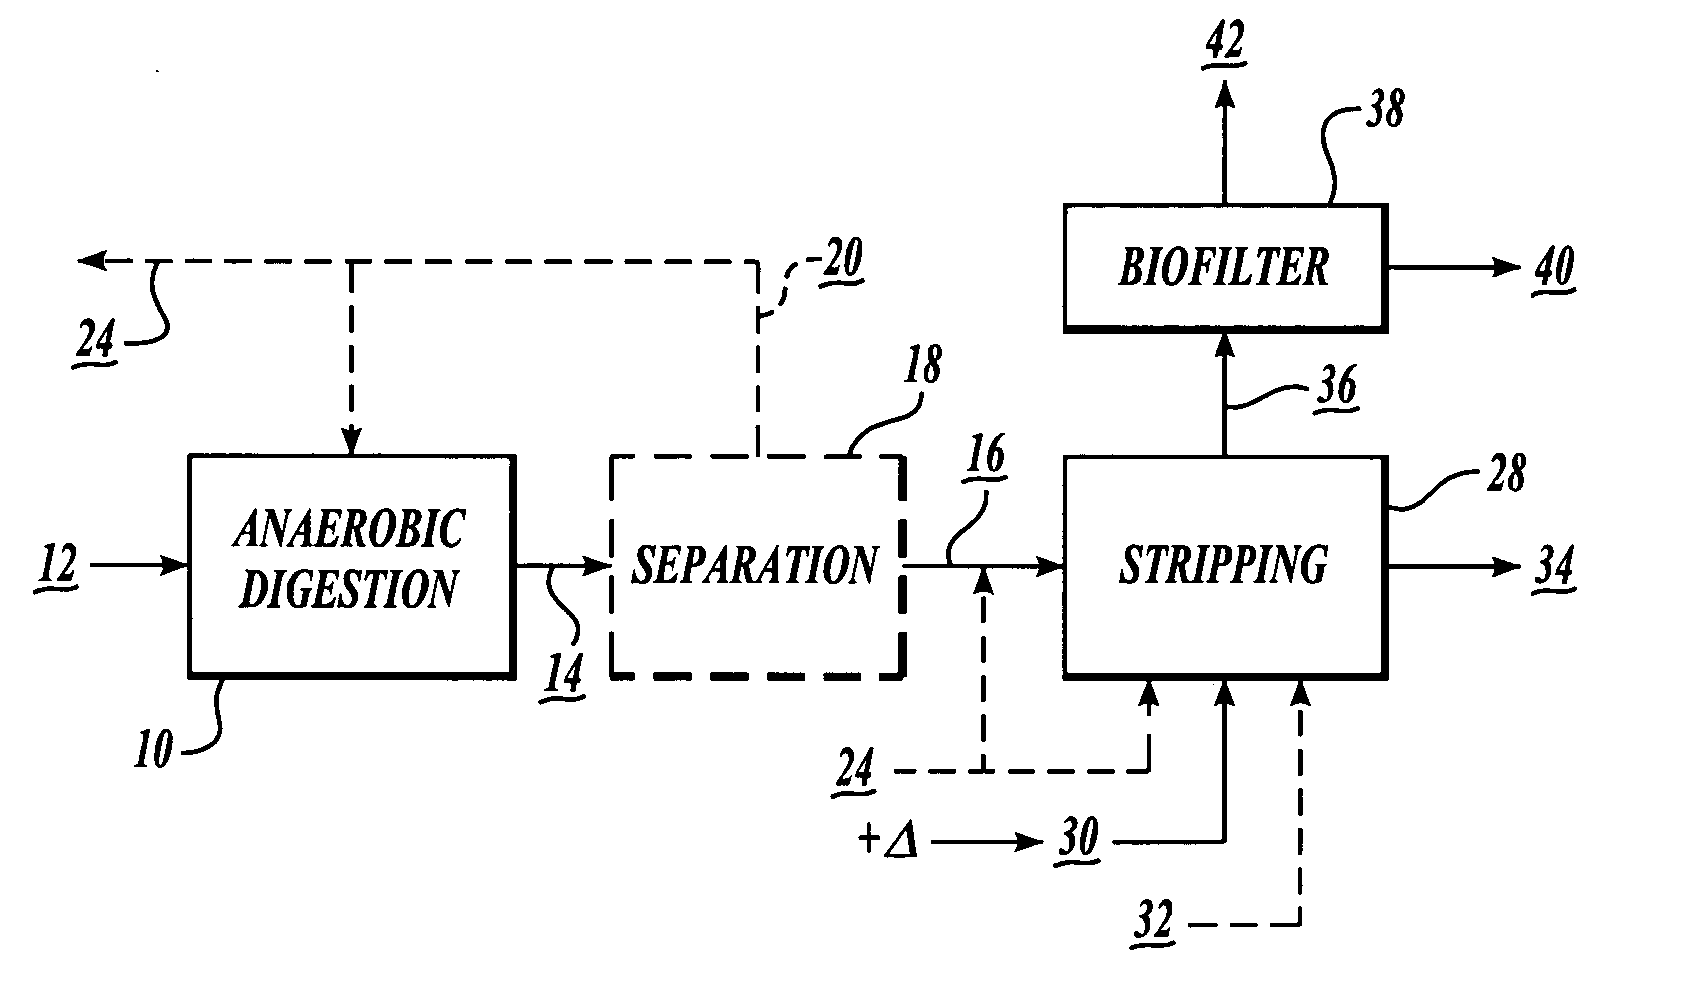 Nitrogen recovery system and method using heated air as stripping gas